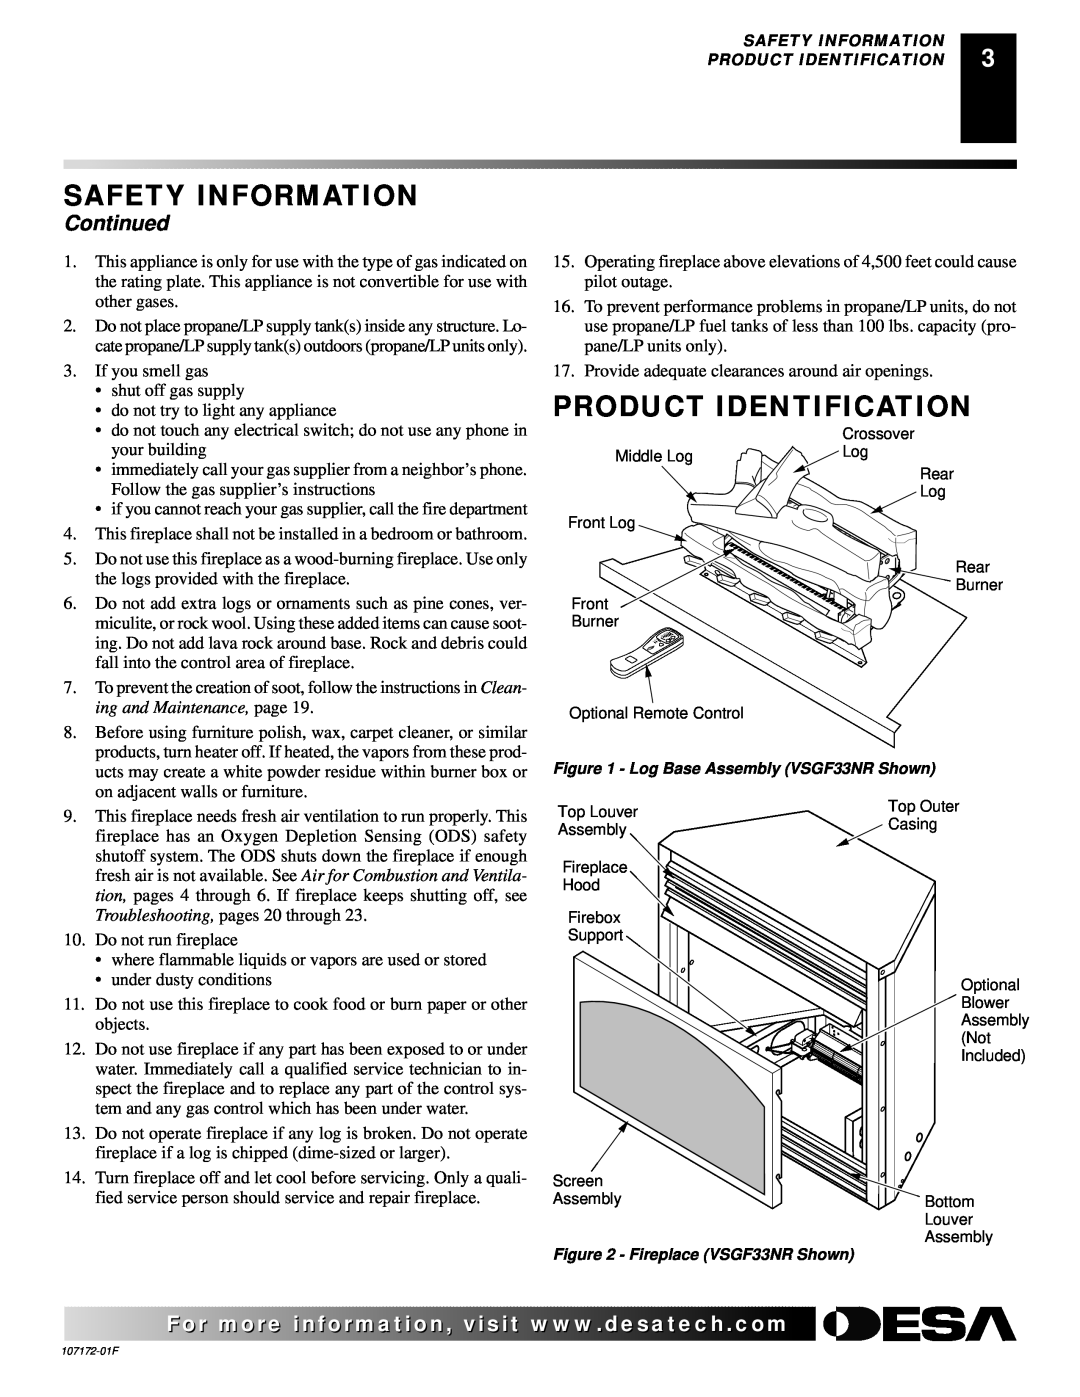 Desa EFS33PR installation manual Product Identification, Continued, Safety Information 